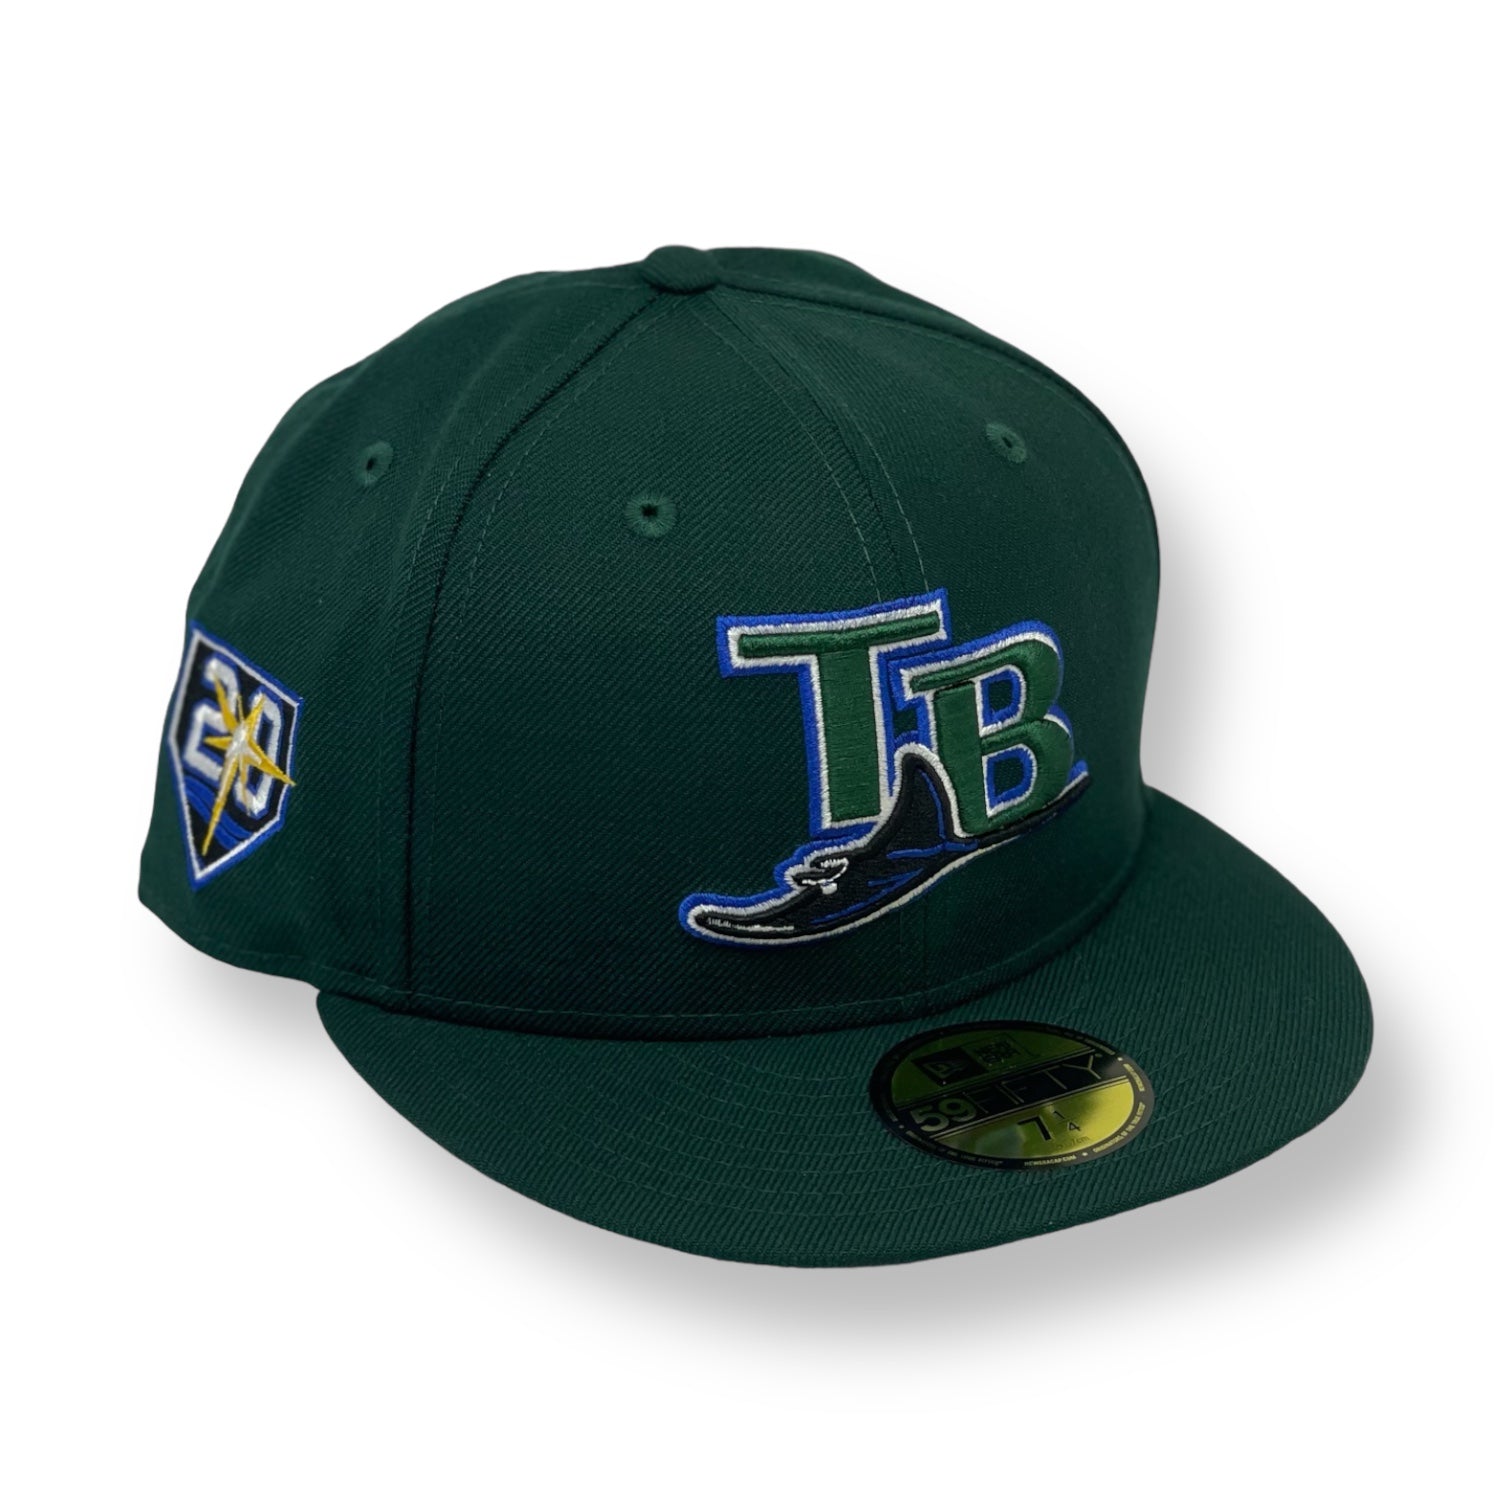 TAMPA BAY DEVIL RAYS (DK-GREEN) (20TH ANN ) NEW ERA 59FIFTY FITTED